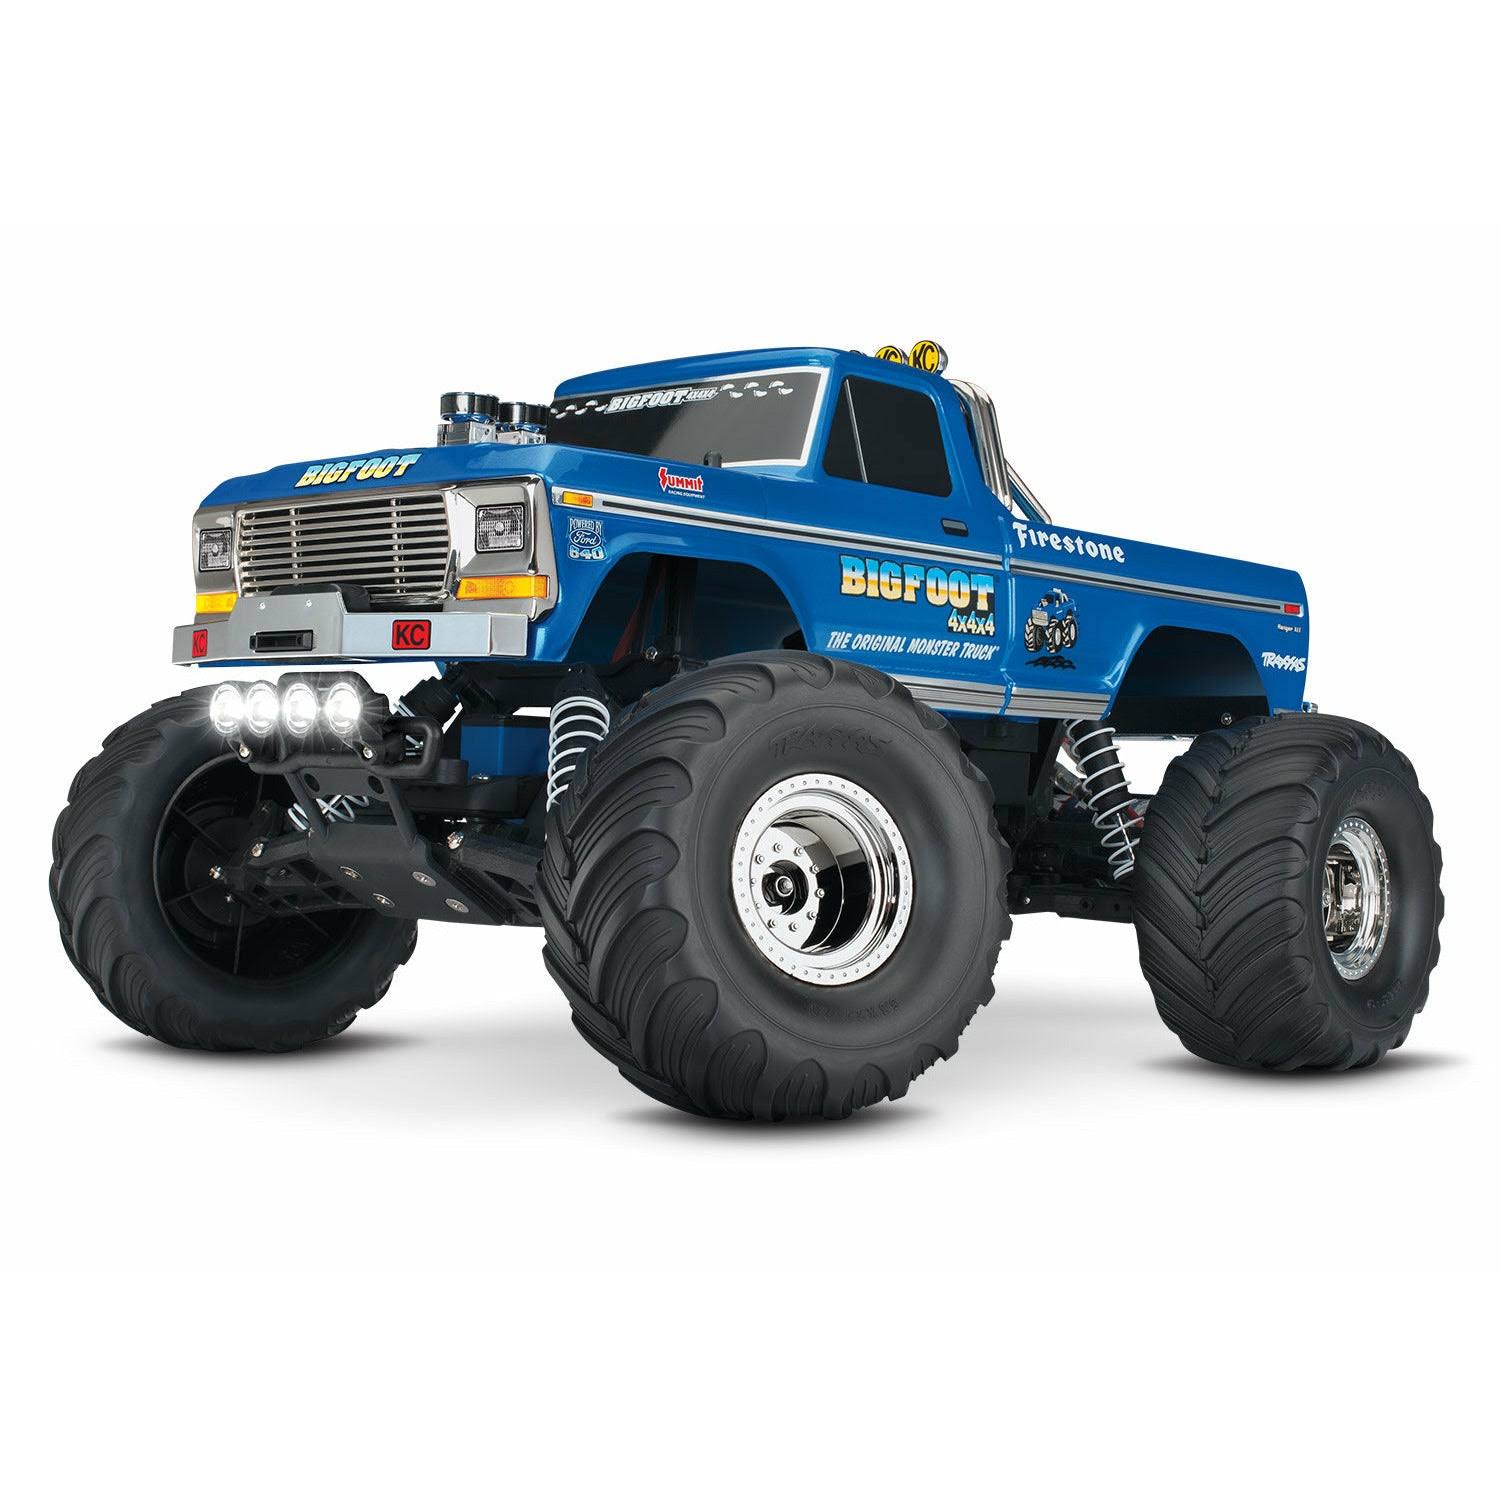 Traxxas 36034-61R5 BIGFOOT No.1 RTR with Battery +LED Light 1/10 2WD Monster Truck